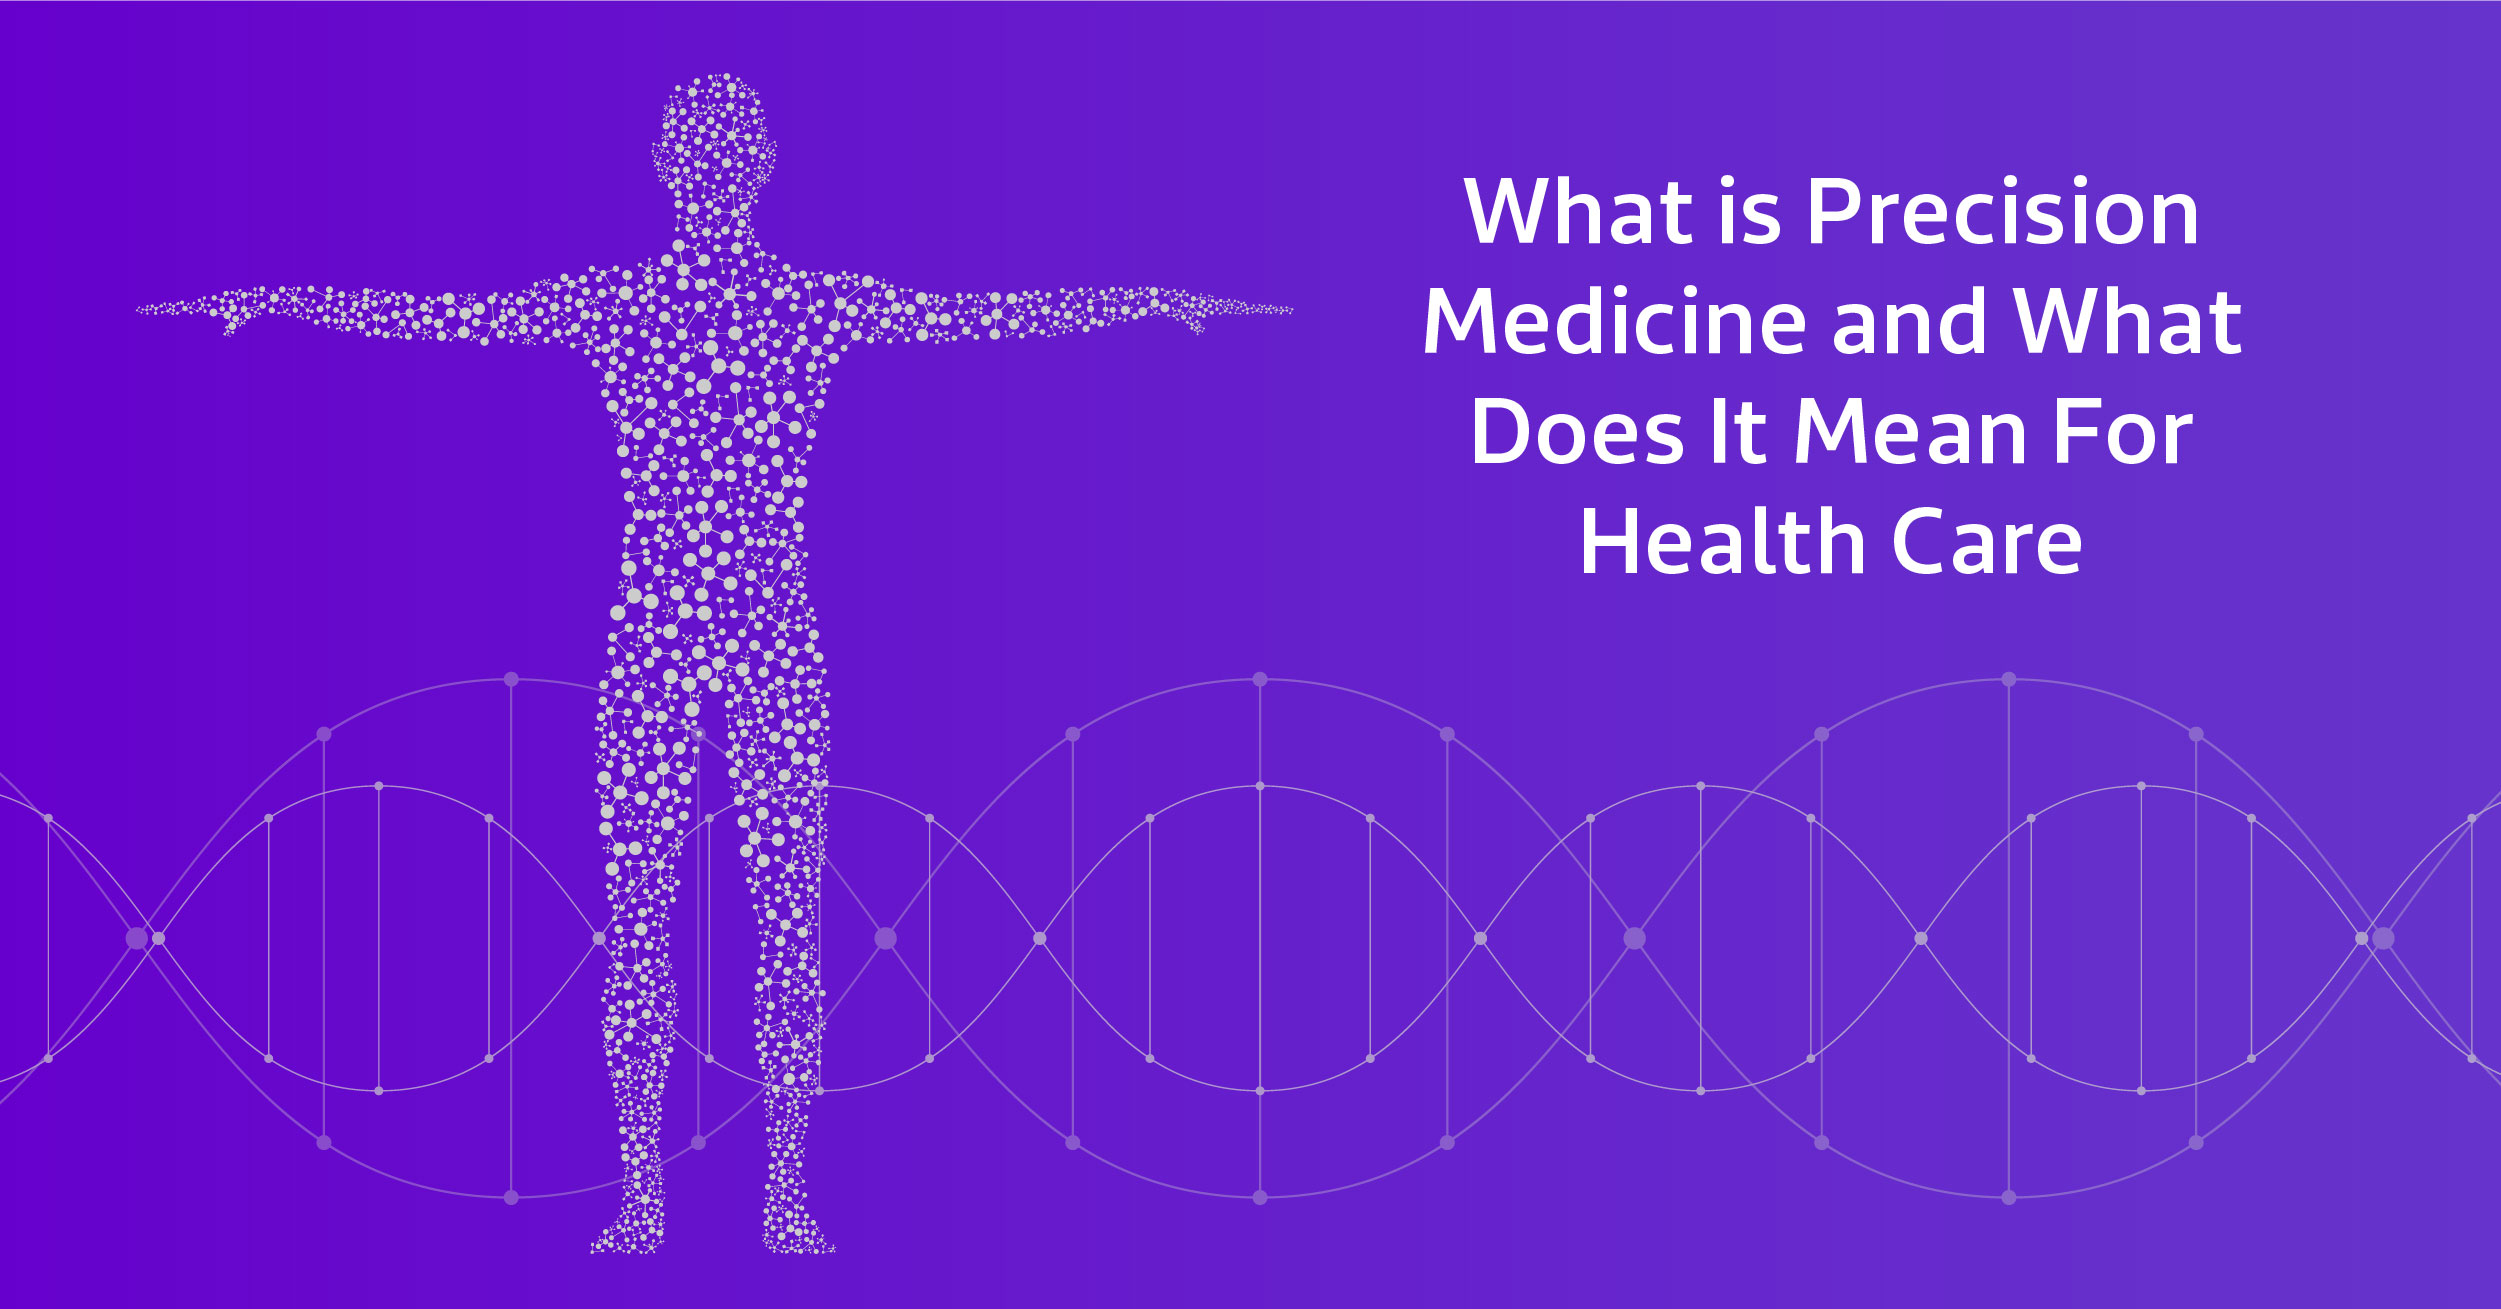 purple background with text "what is precision medicine and what does it mean for health care"